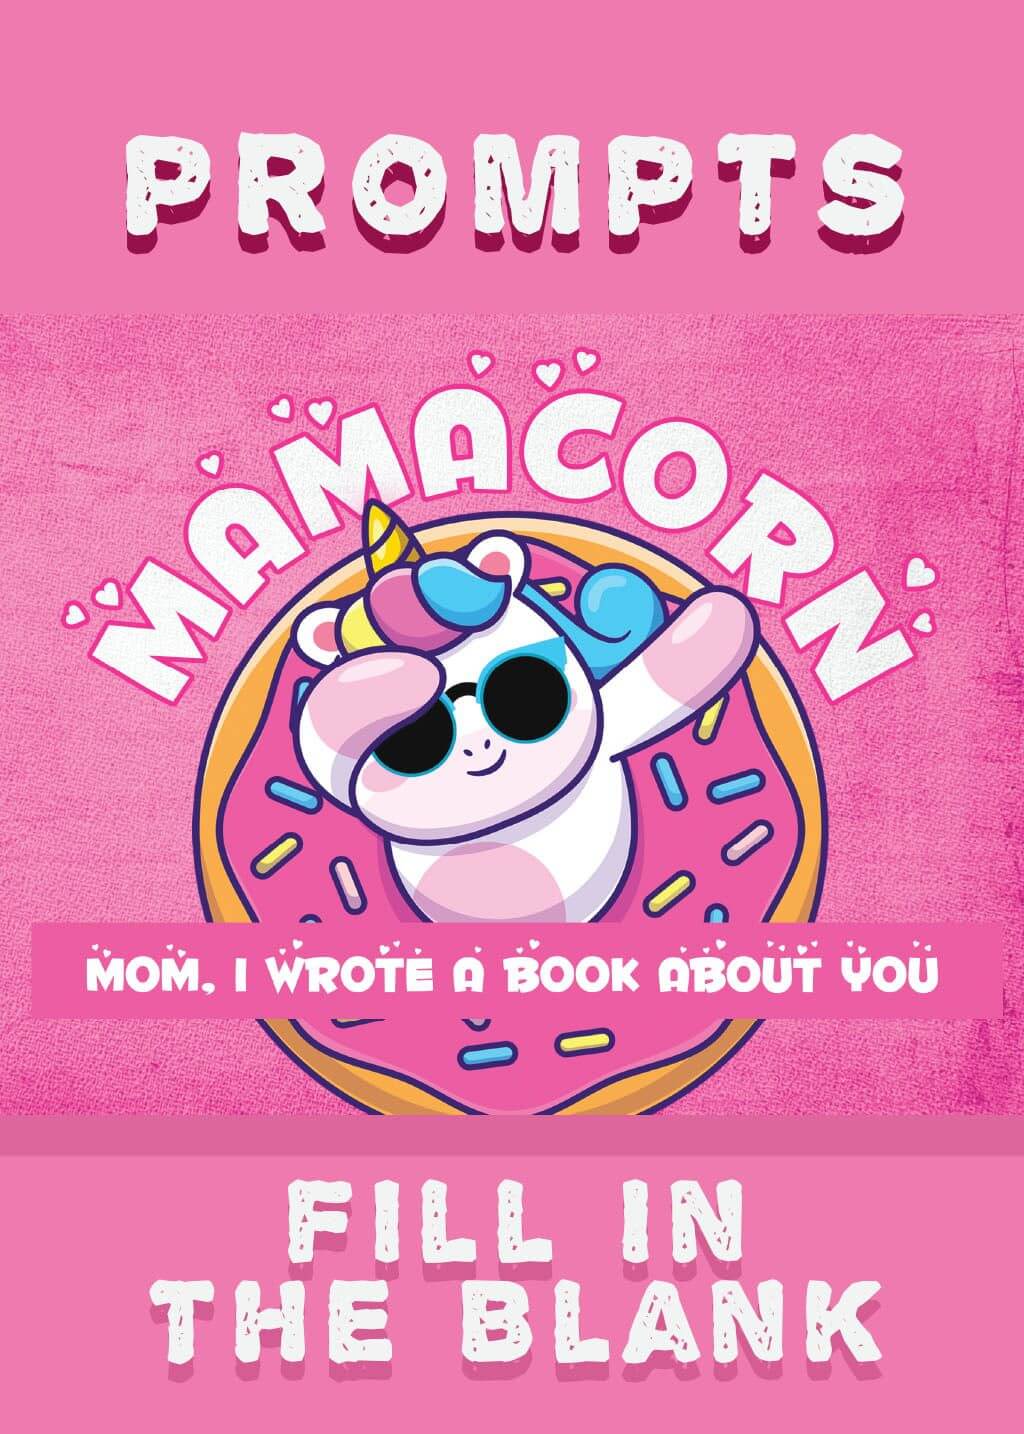 mothers-day-Mom-I-wrote-a-book-about-you